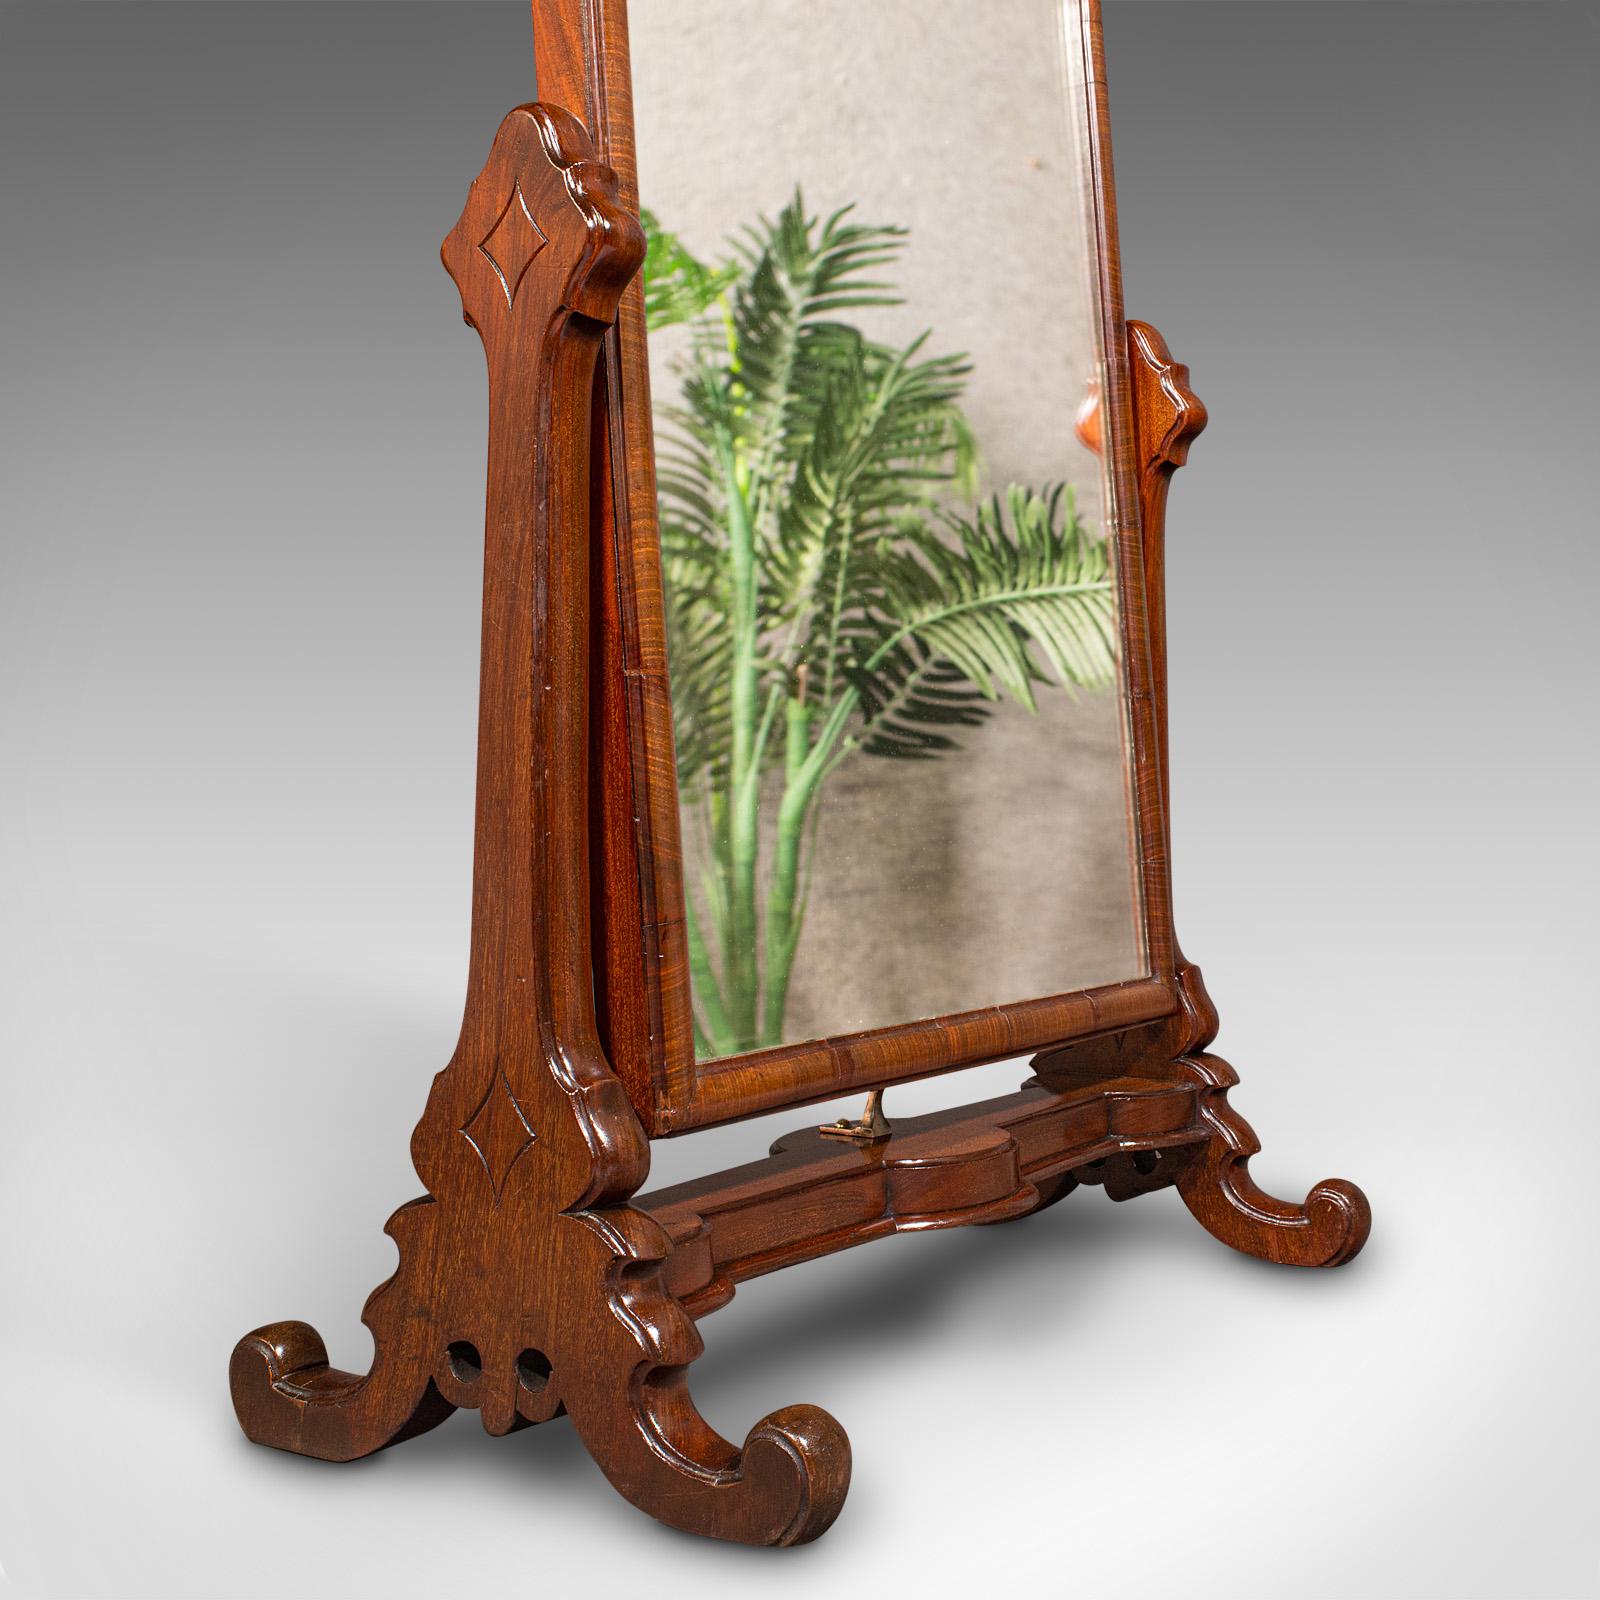 19th Century Antique Boot Maker's Mirror, English, Cheval, Dressing, Early Victorian, C.1840 For Sale